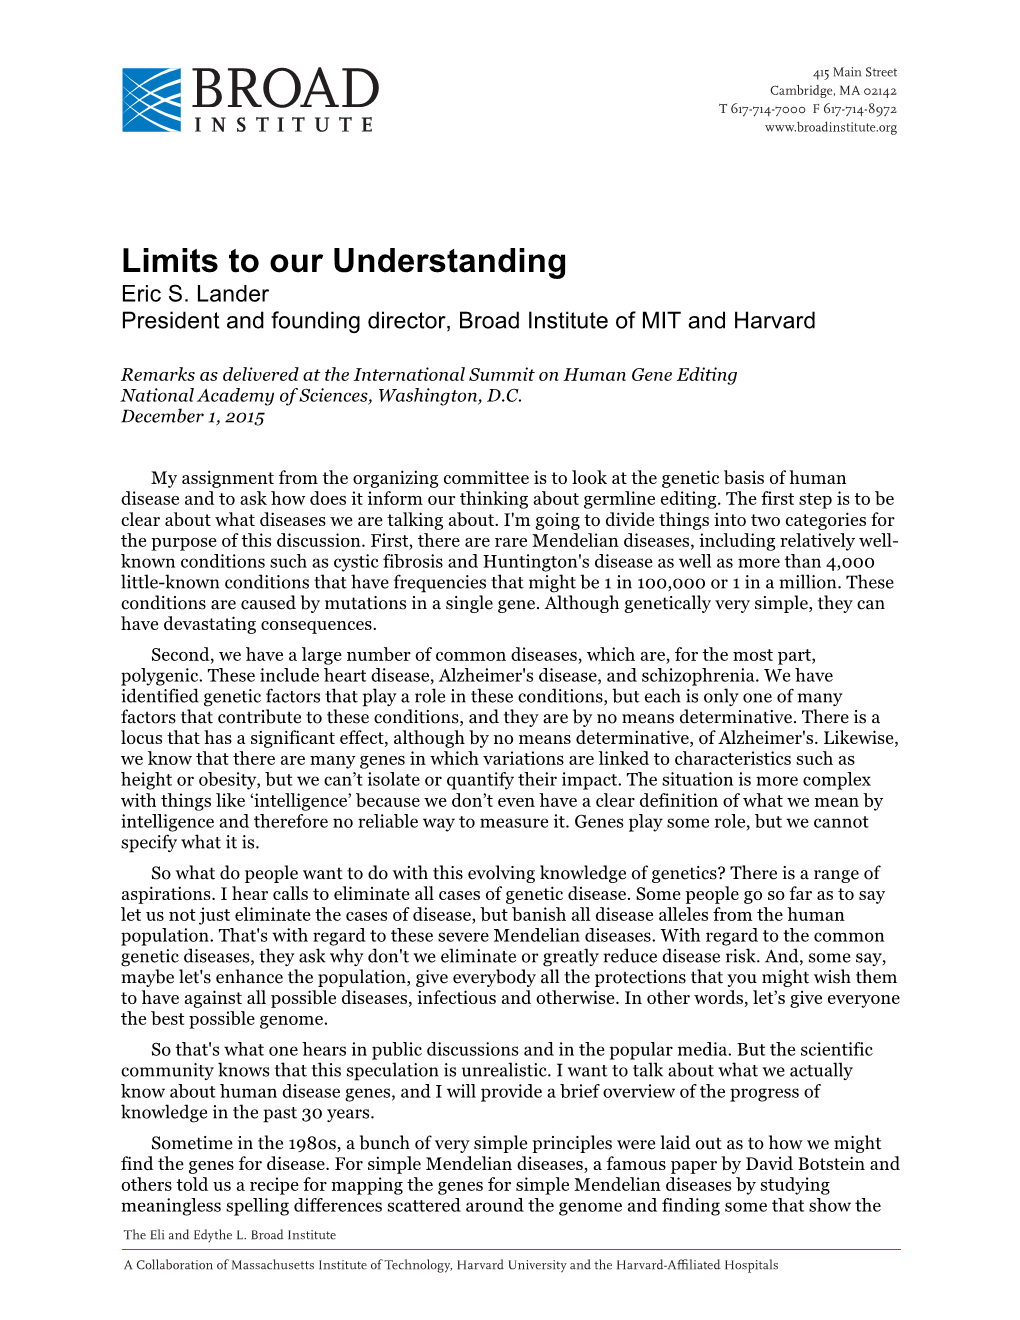 Limits to Our Understanding Eric S